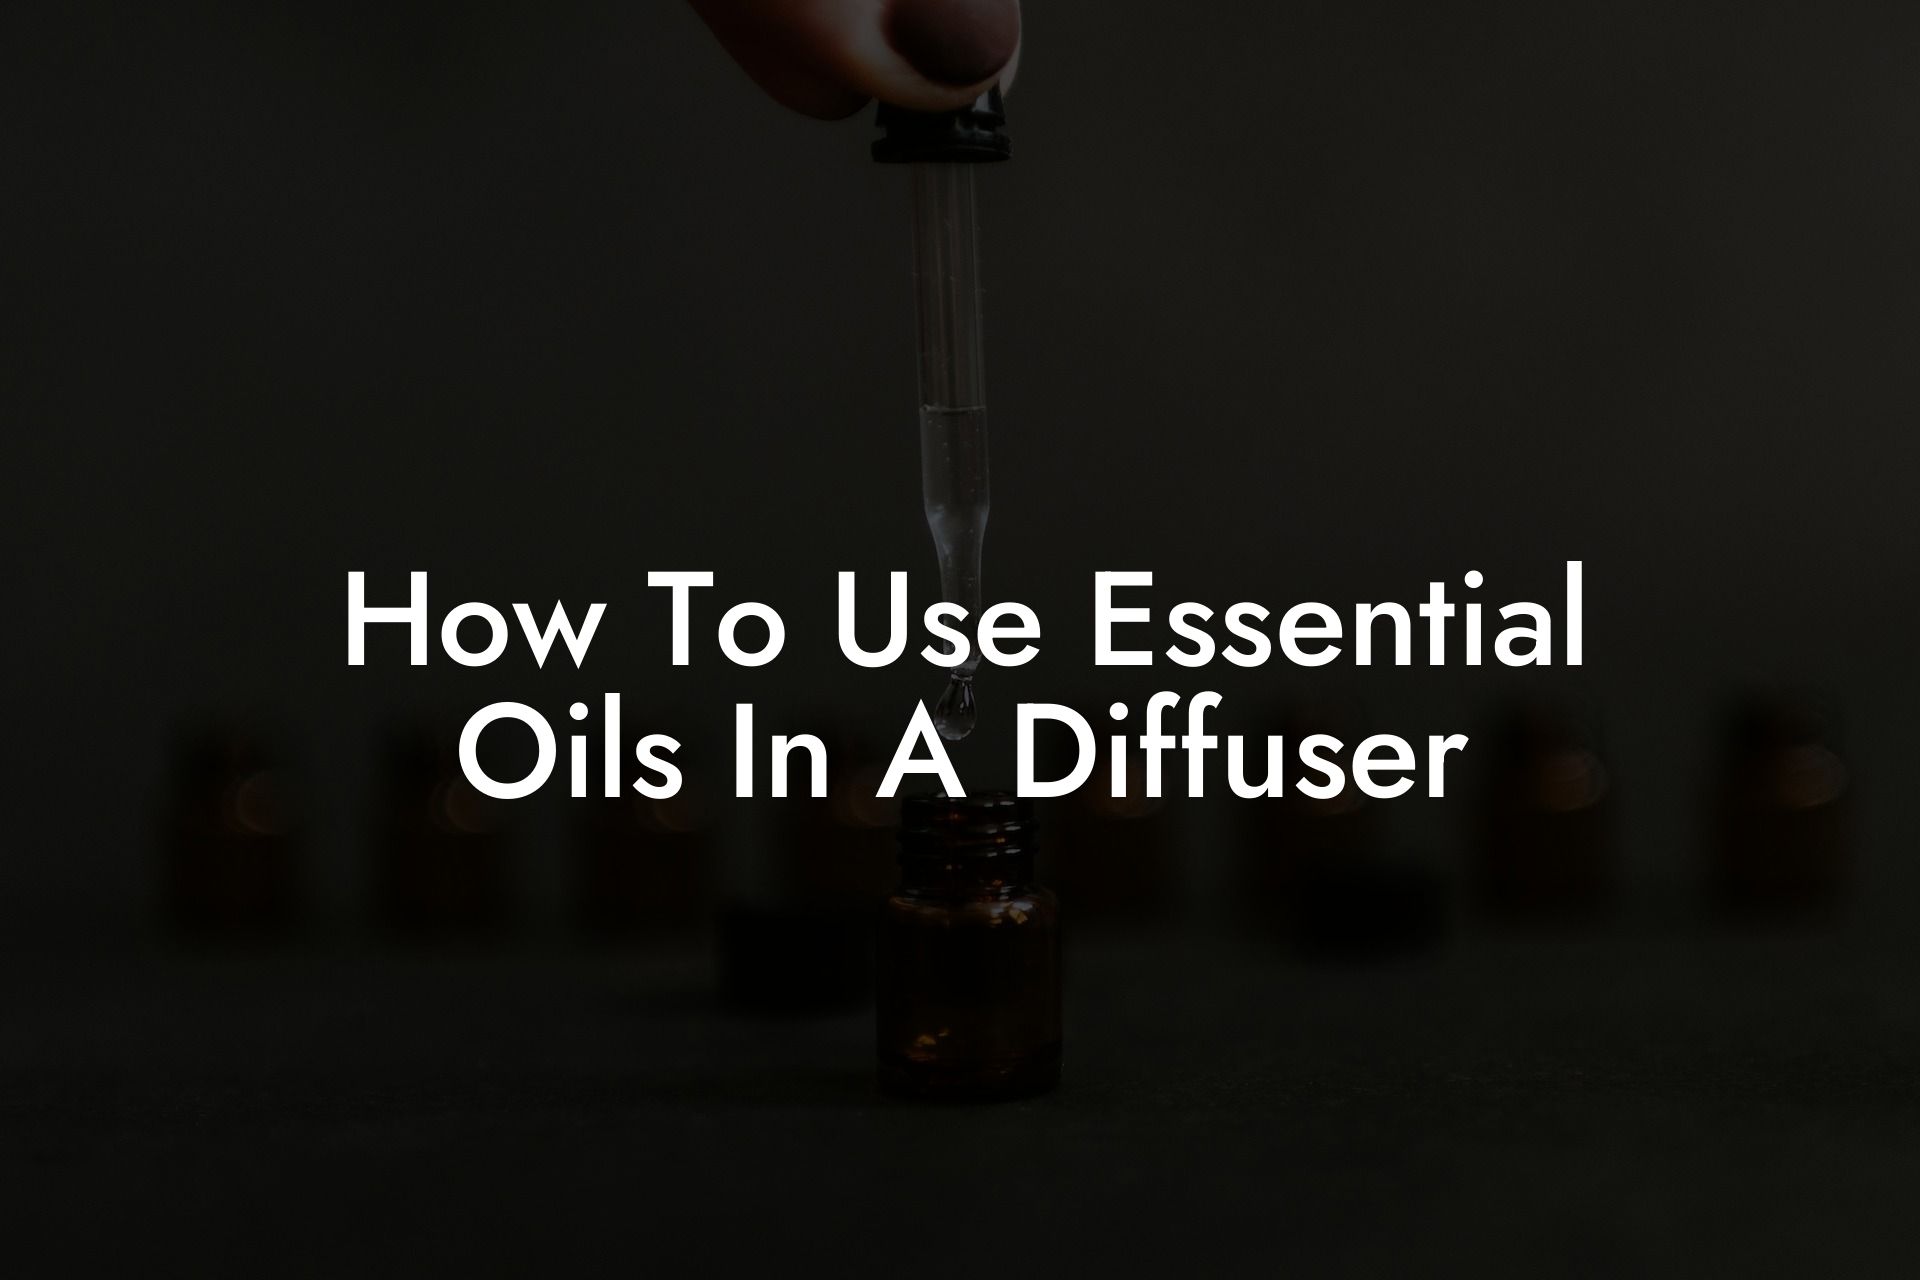 How To Use Essential Oils In A Diffuser